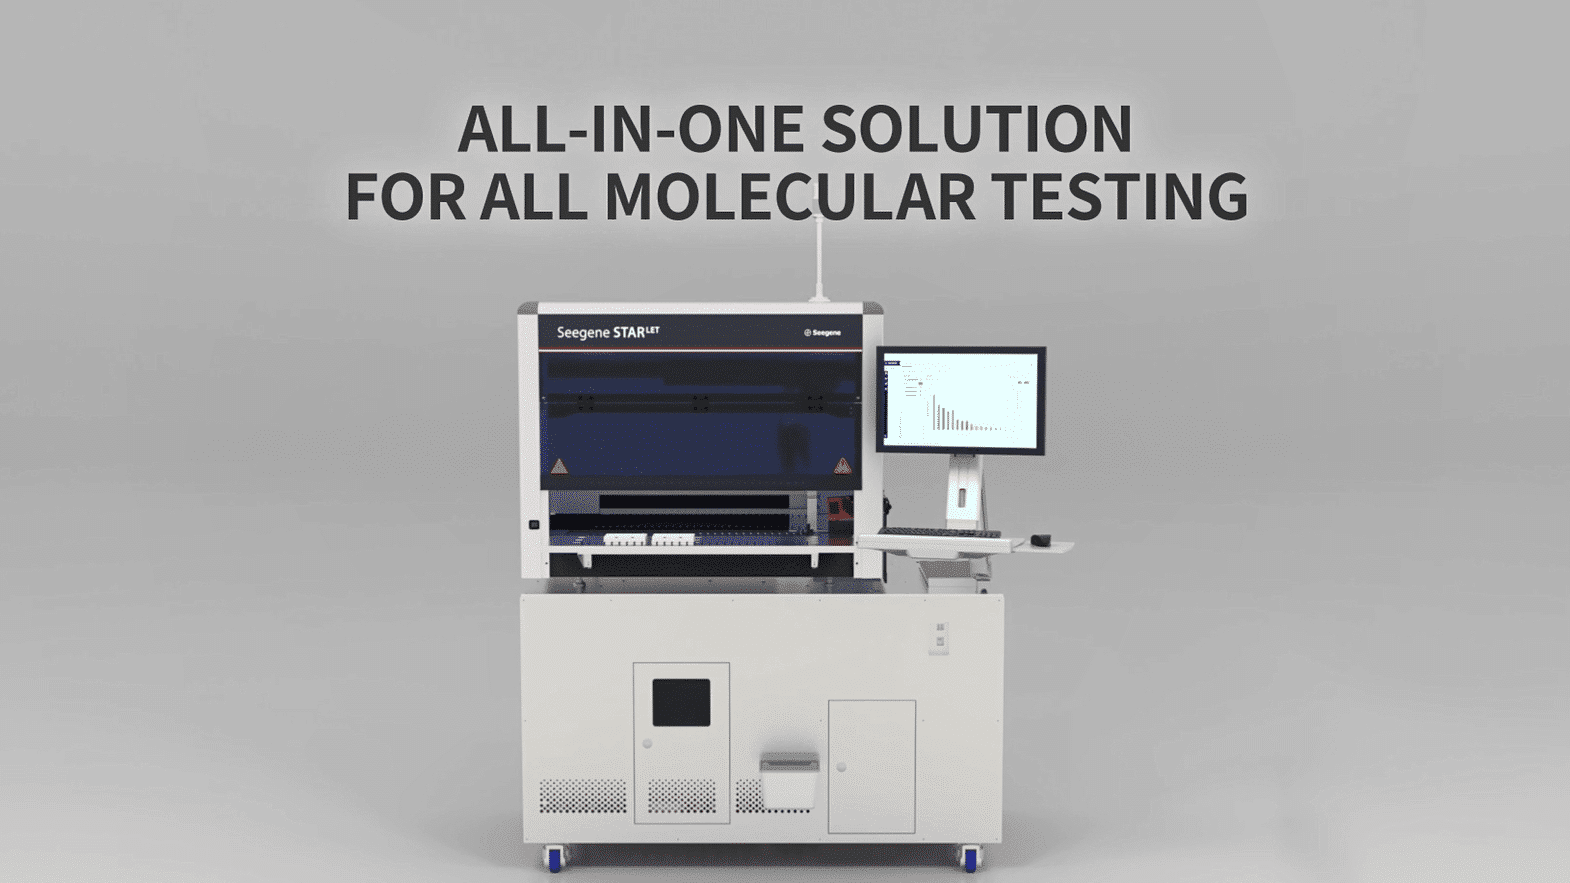 Image shows Seegene's STARlet AIOS All in one solution for molecular testing for laboratories